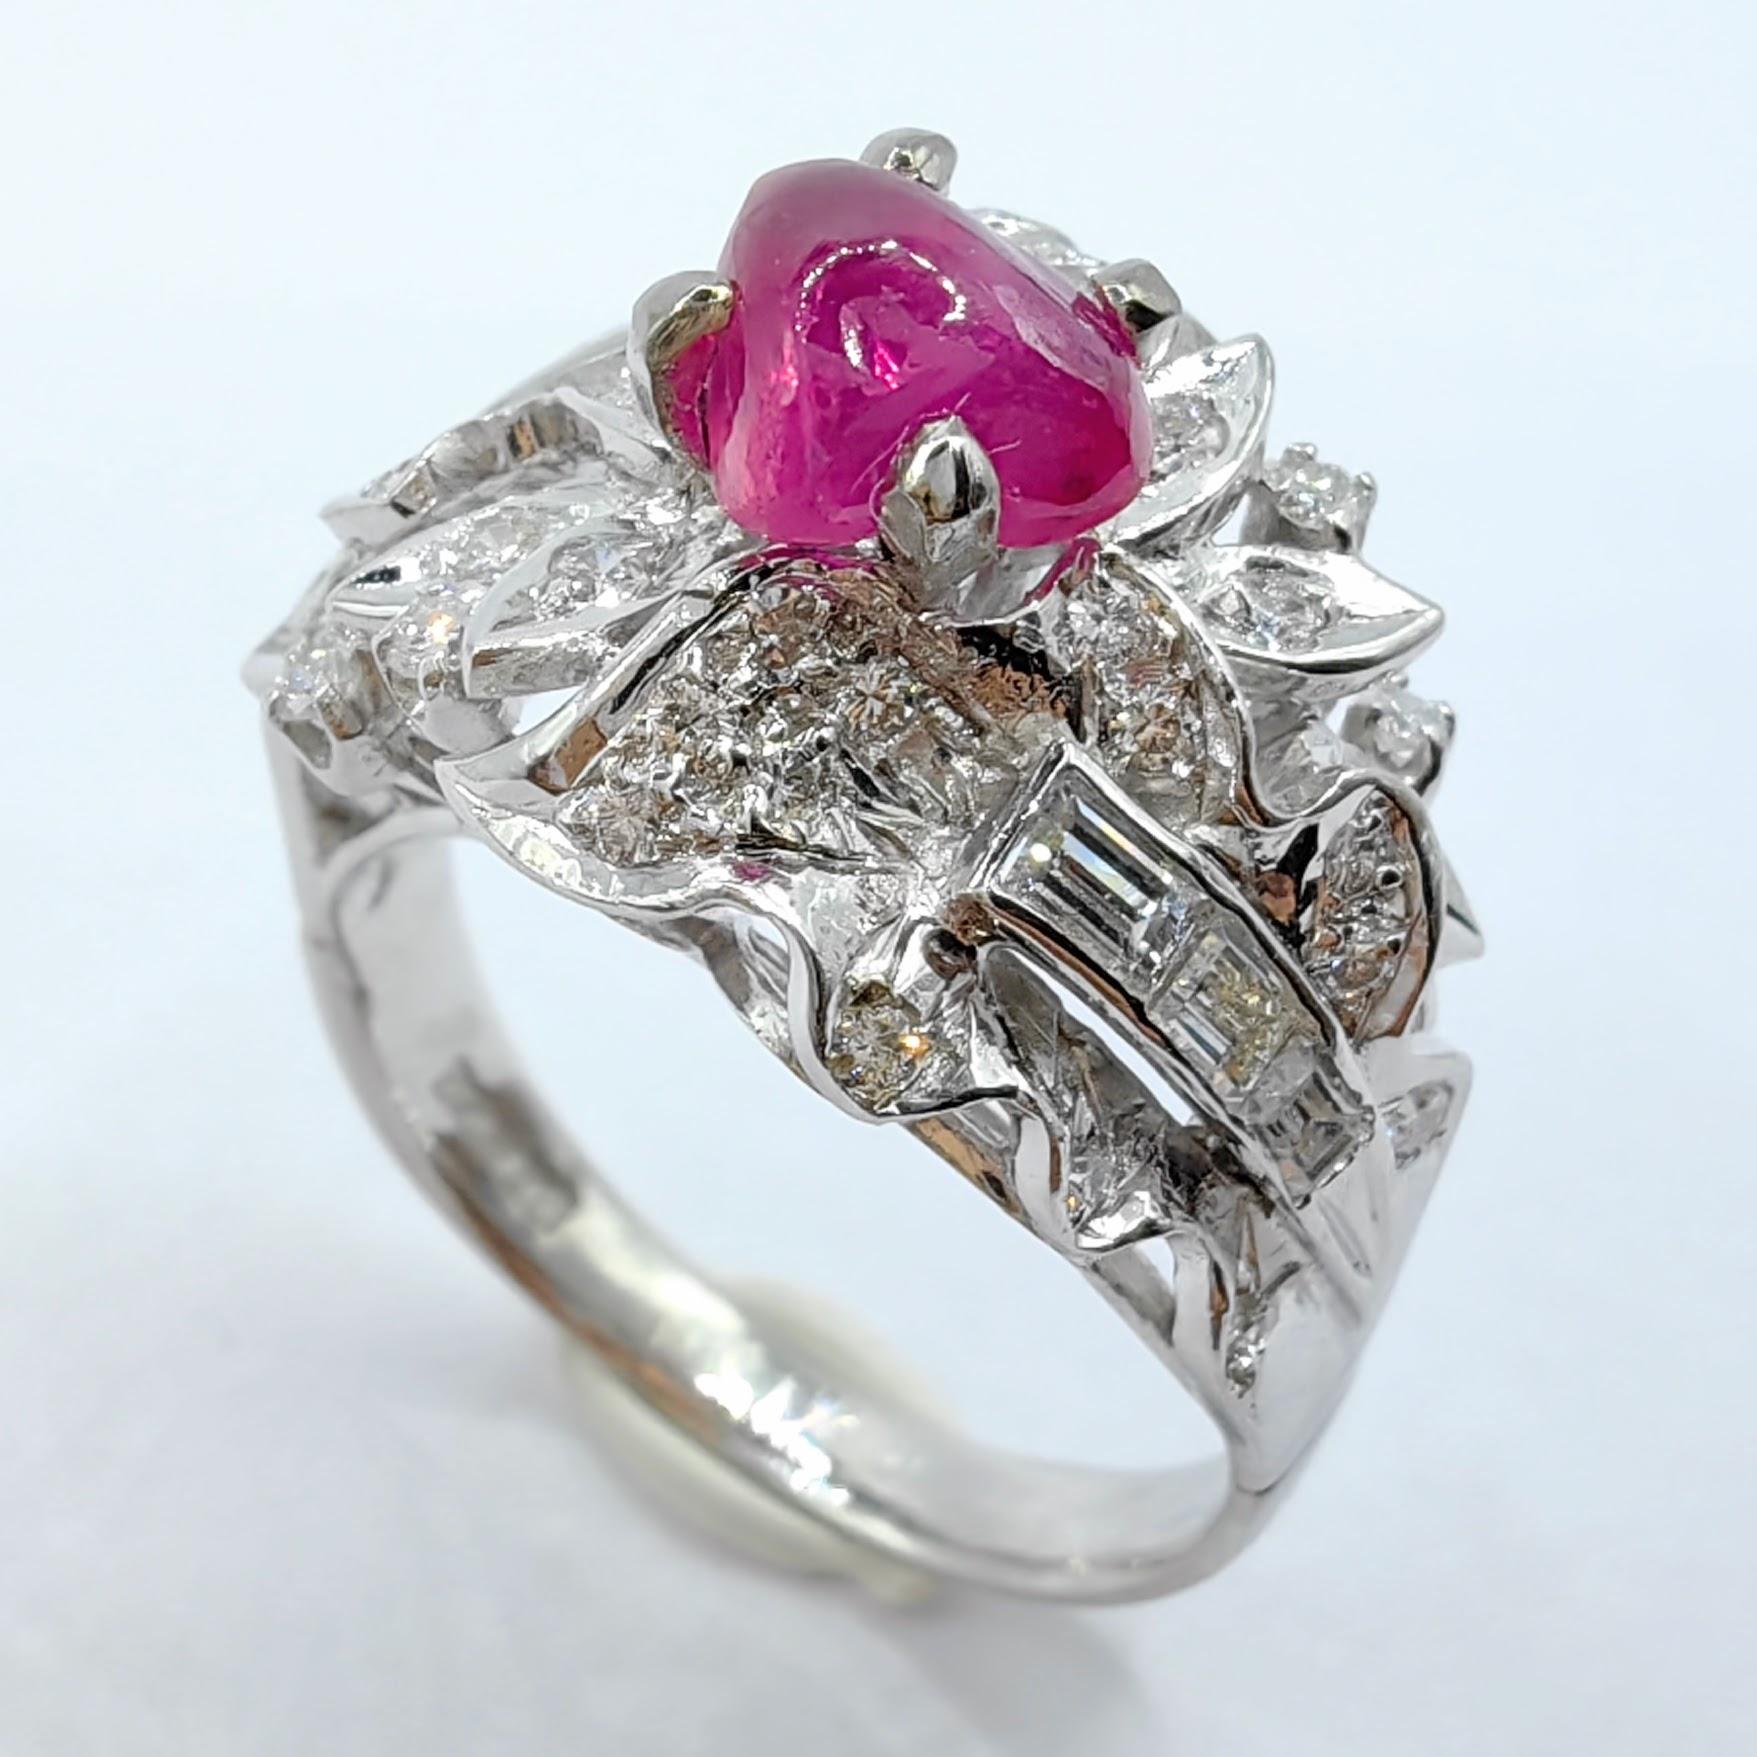 Introducing our One-of-a-kind Vintage 1.52ct Freeform Ruby Edwardian Diamond Ring in Platinum, a captivating piece that beautifully blends vintage charm and exceptional craftsmanship. This exquisite ring features an exceptionally rare and